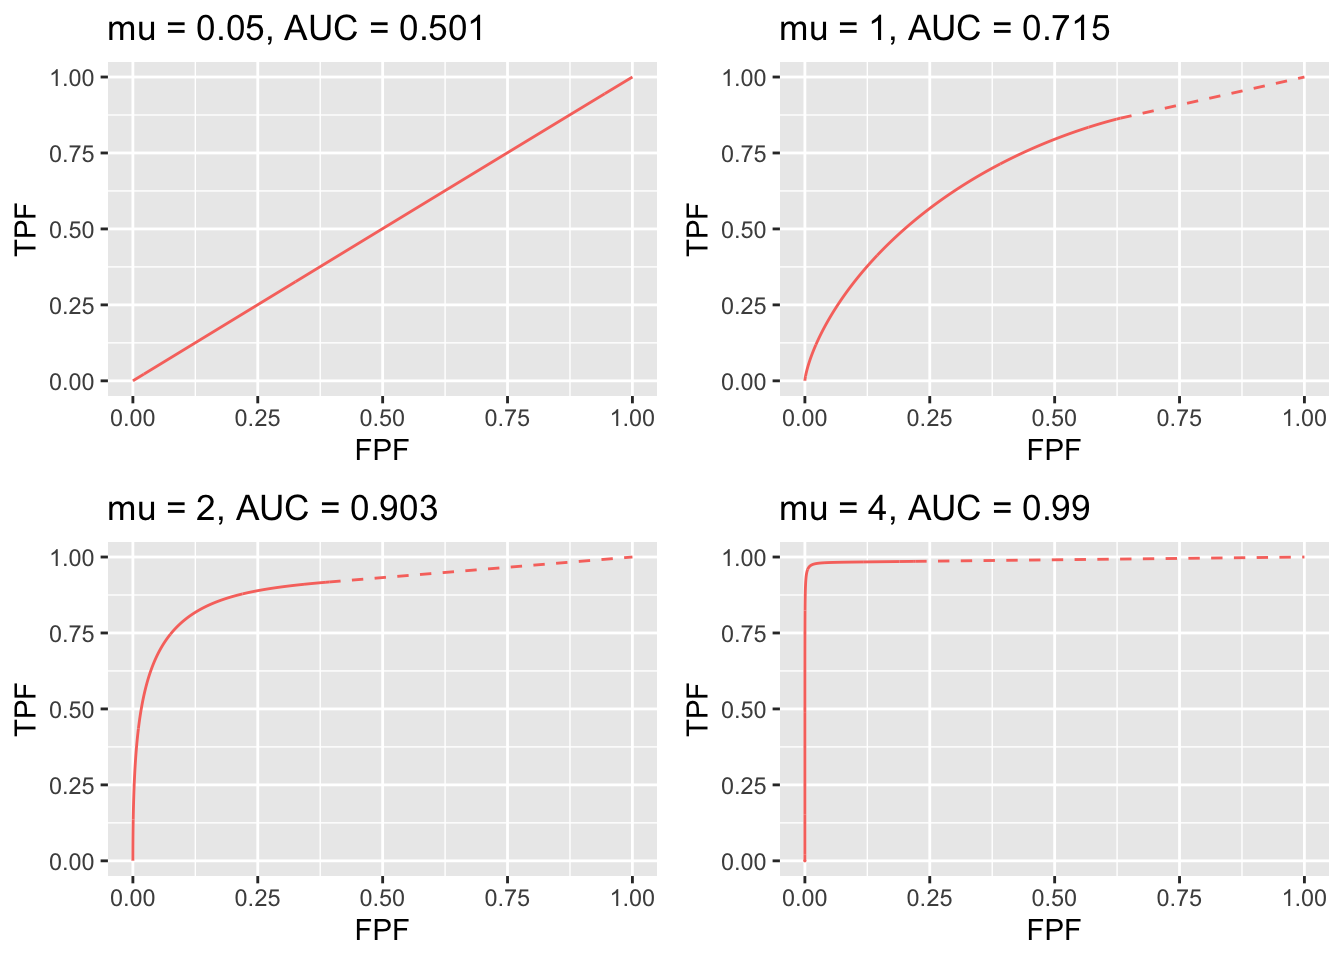 RSM-predicted ROC curves for indicated values of the $\mu$ parameter. The solid curve is the continuous section and the dashed part is the inaccessible part. Notice the transition, as $\mu$ increases, from near chance level performance to almost perfect performance, and the end-point moves from near (1,1) to near (0,1). The area under the ROC curve includes that under the red dashed line, which credits unmarked non-diseased cases. If this area is not included, a severe underestimate of performance can occur, especially for large $\mu$.